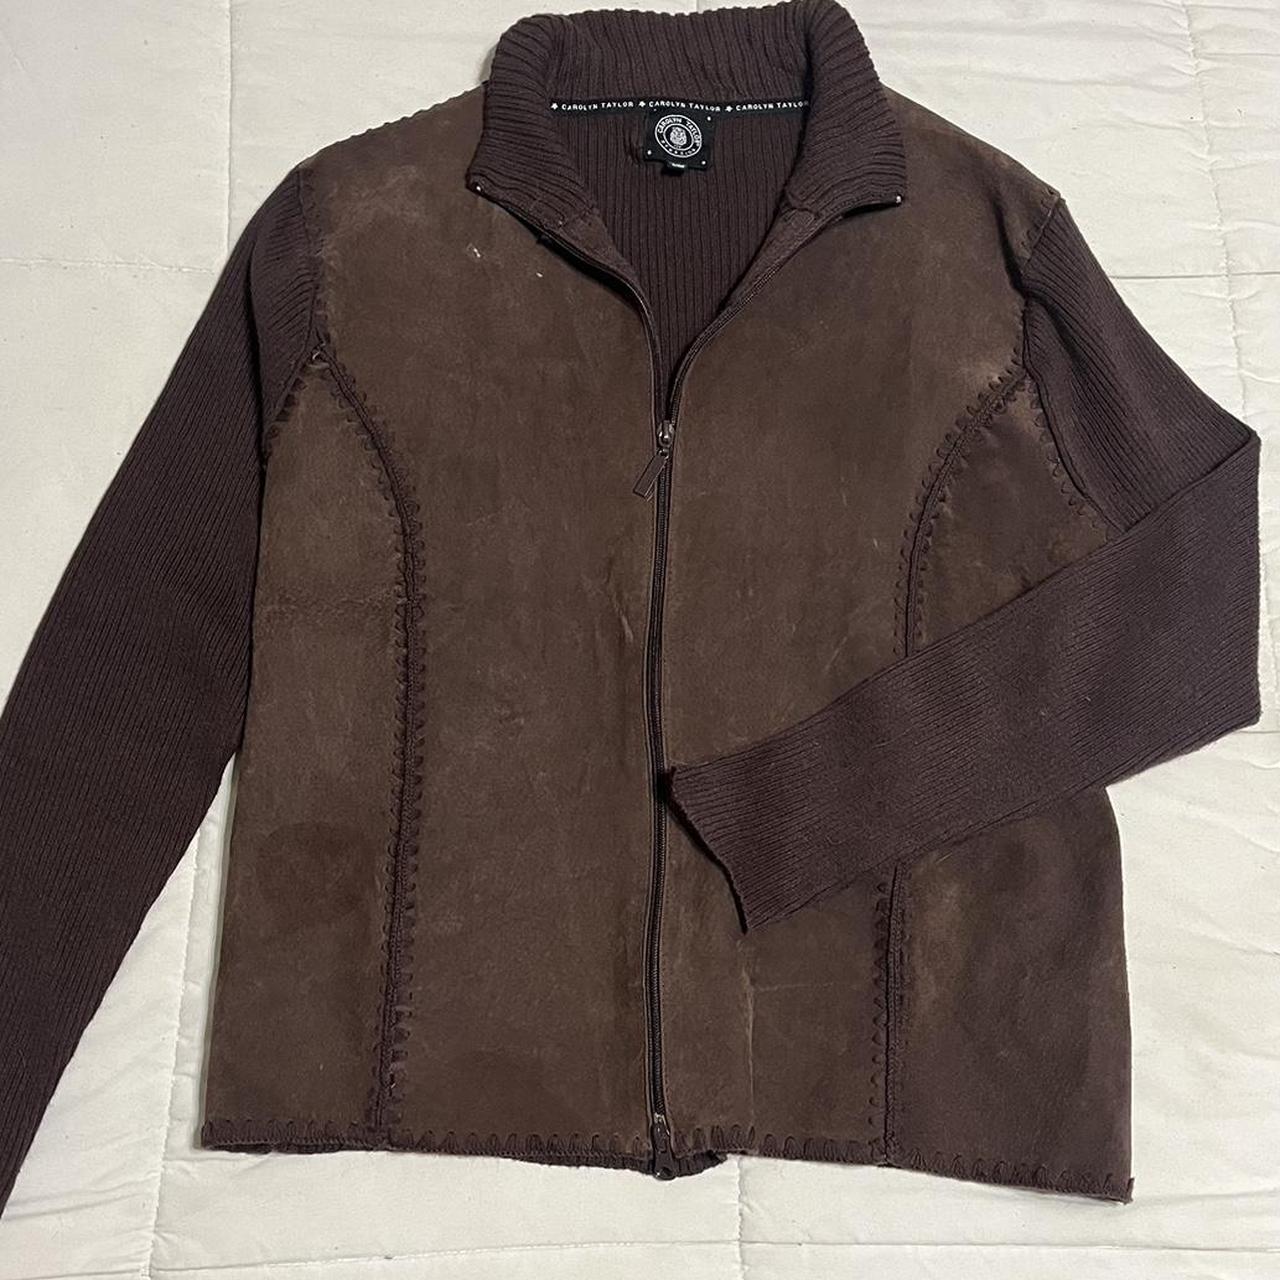 Ribbed jacket with a suede front. There are some... - Depop